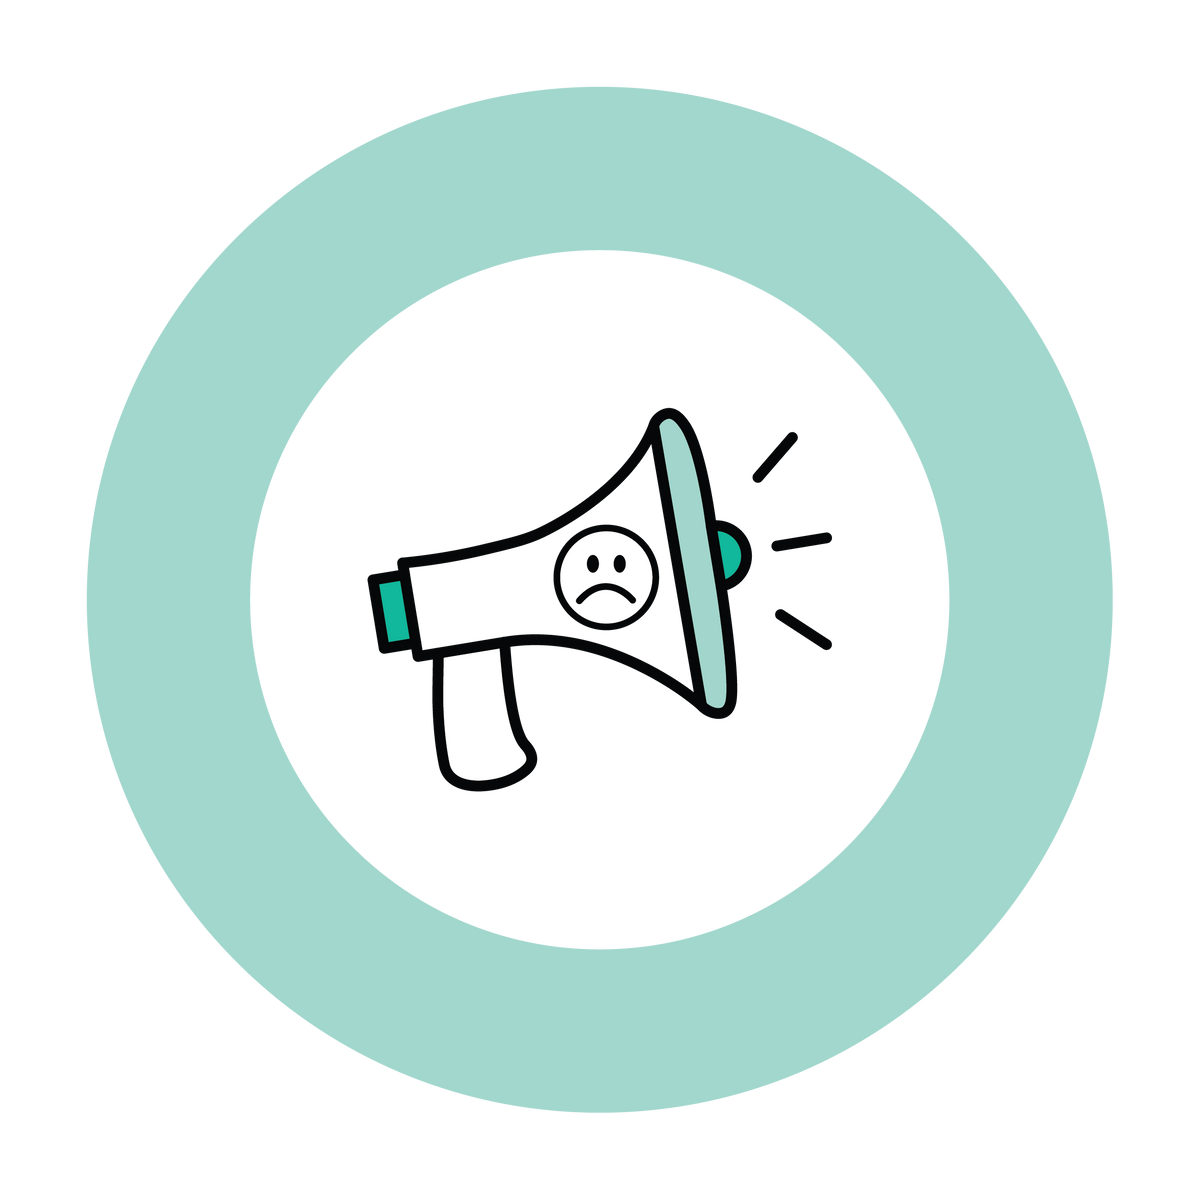 teal circle with a bold icon in the center of a mega phone with a frowny face